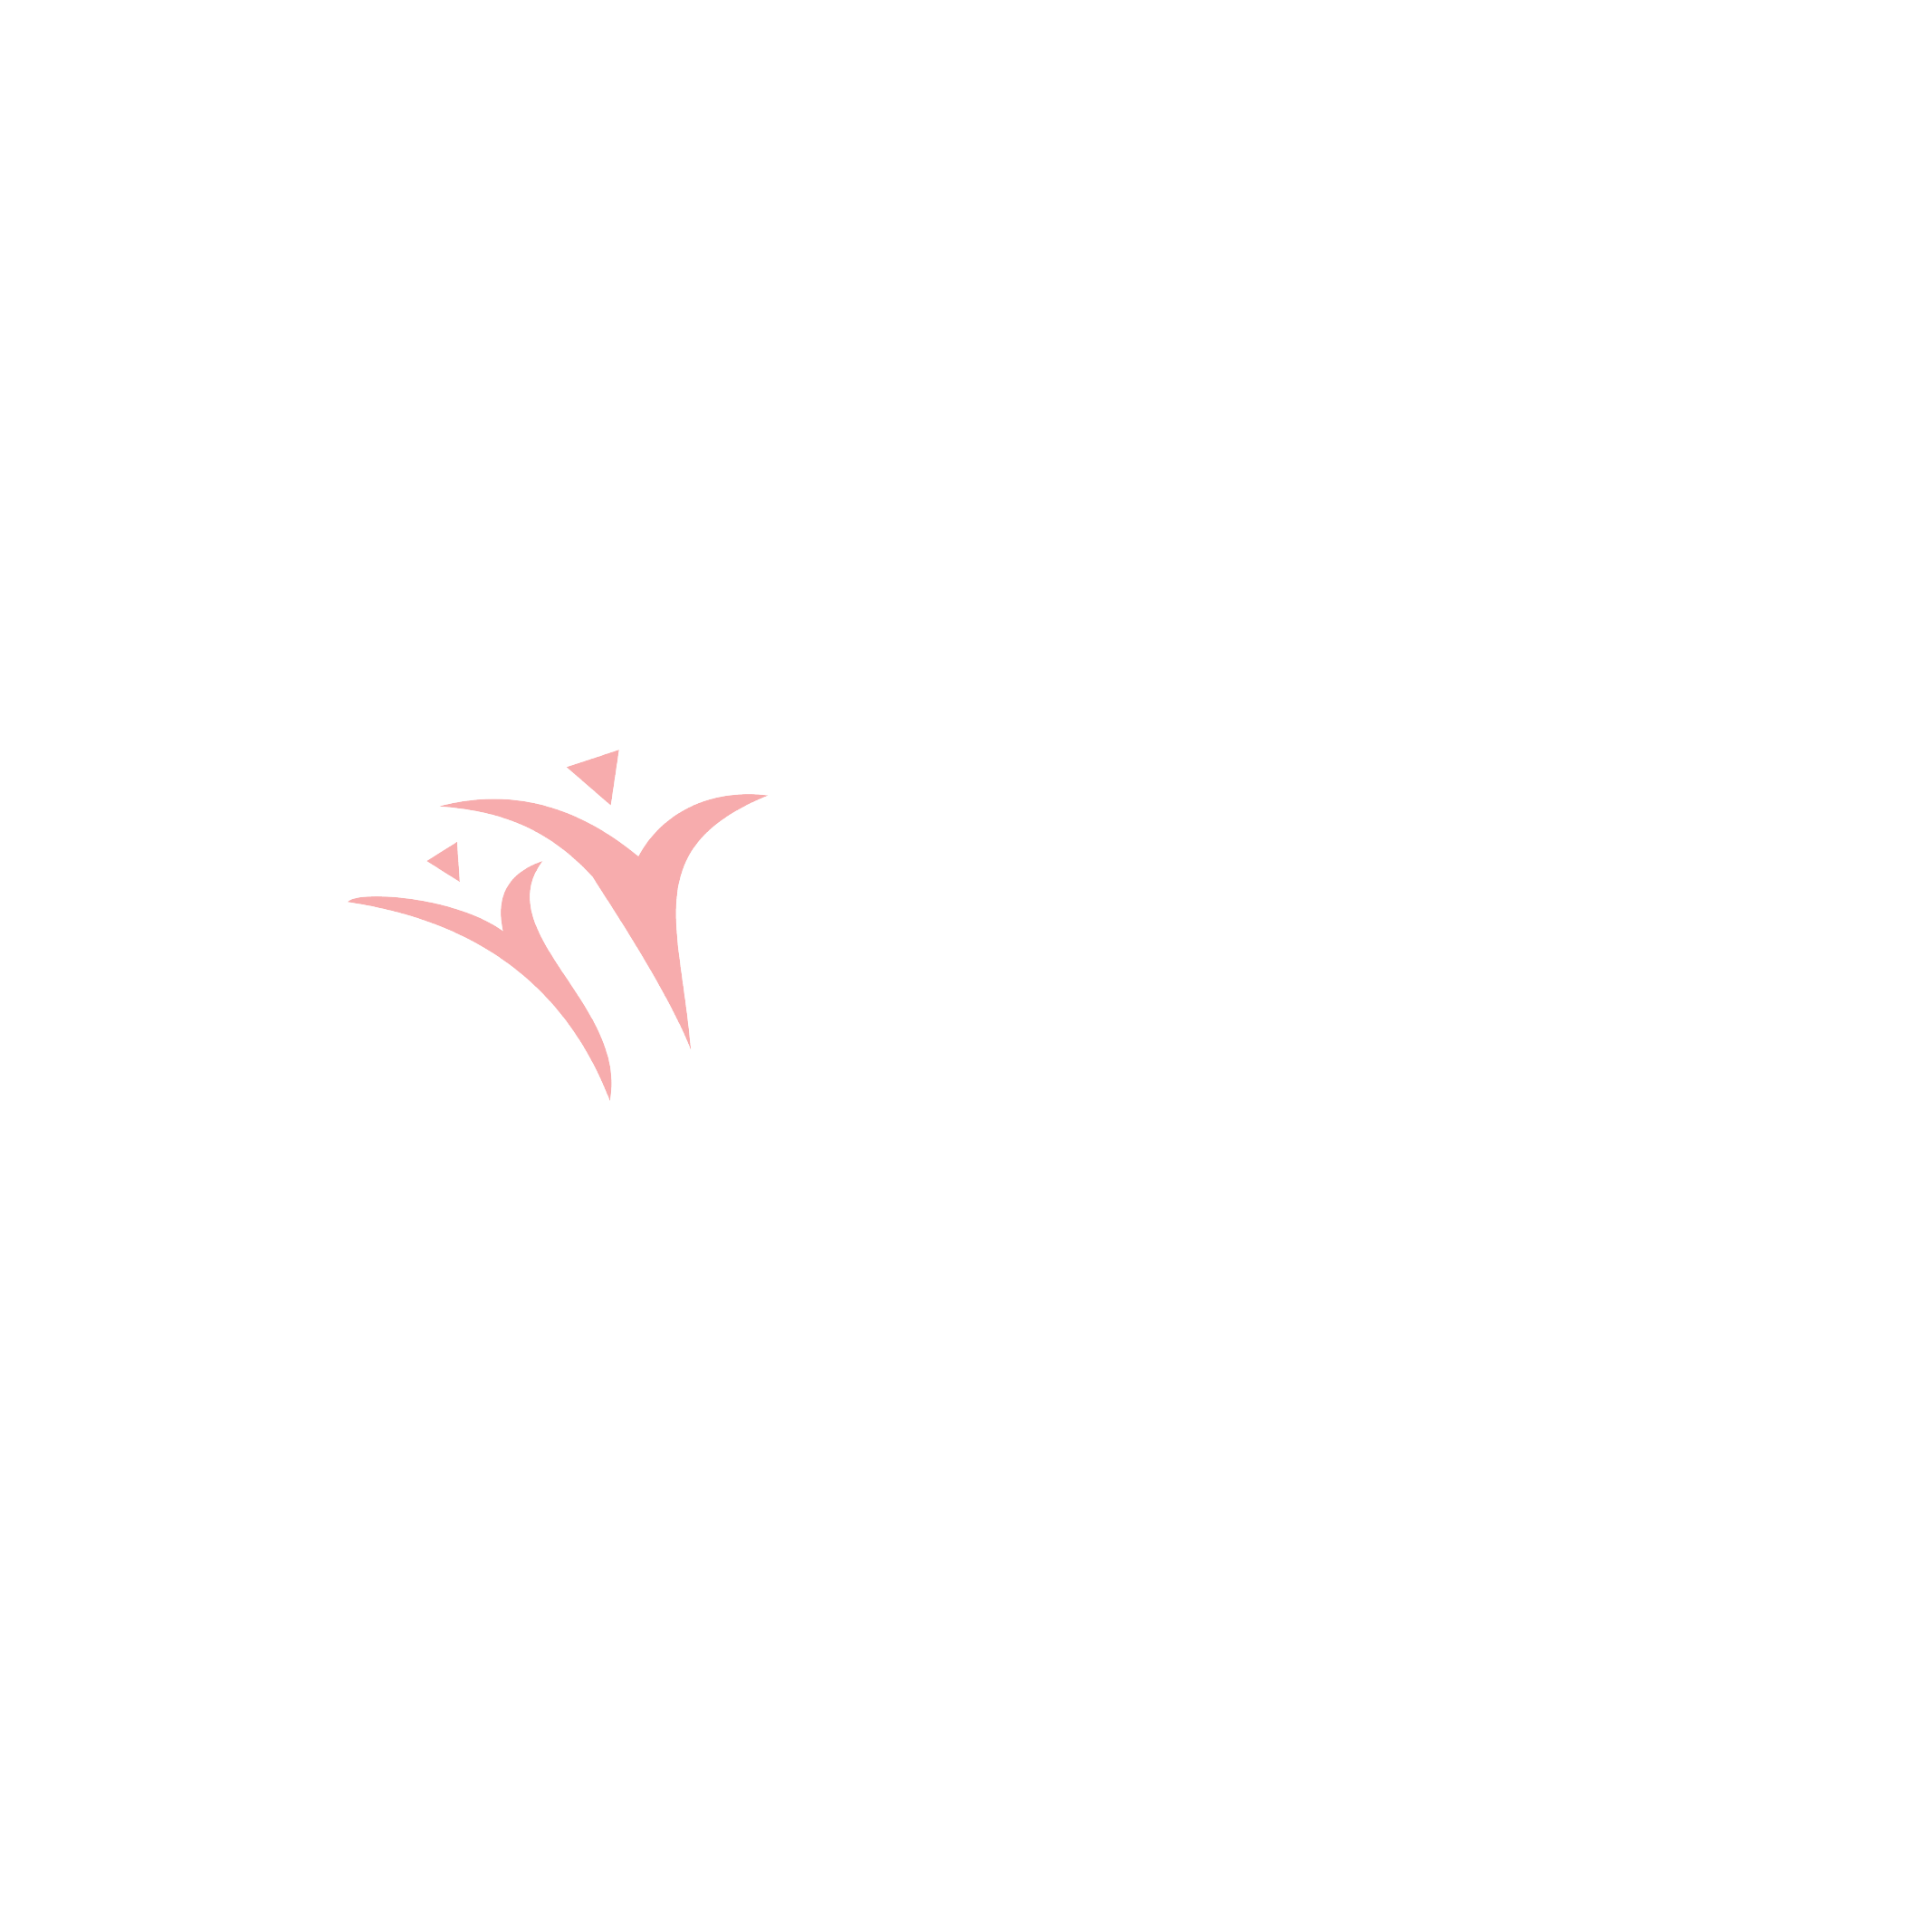 Brand Building for Shades centralized chain of salons.